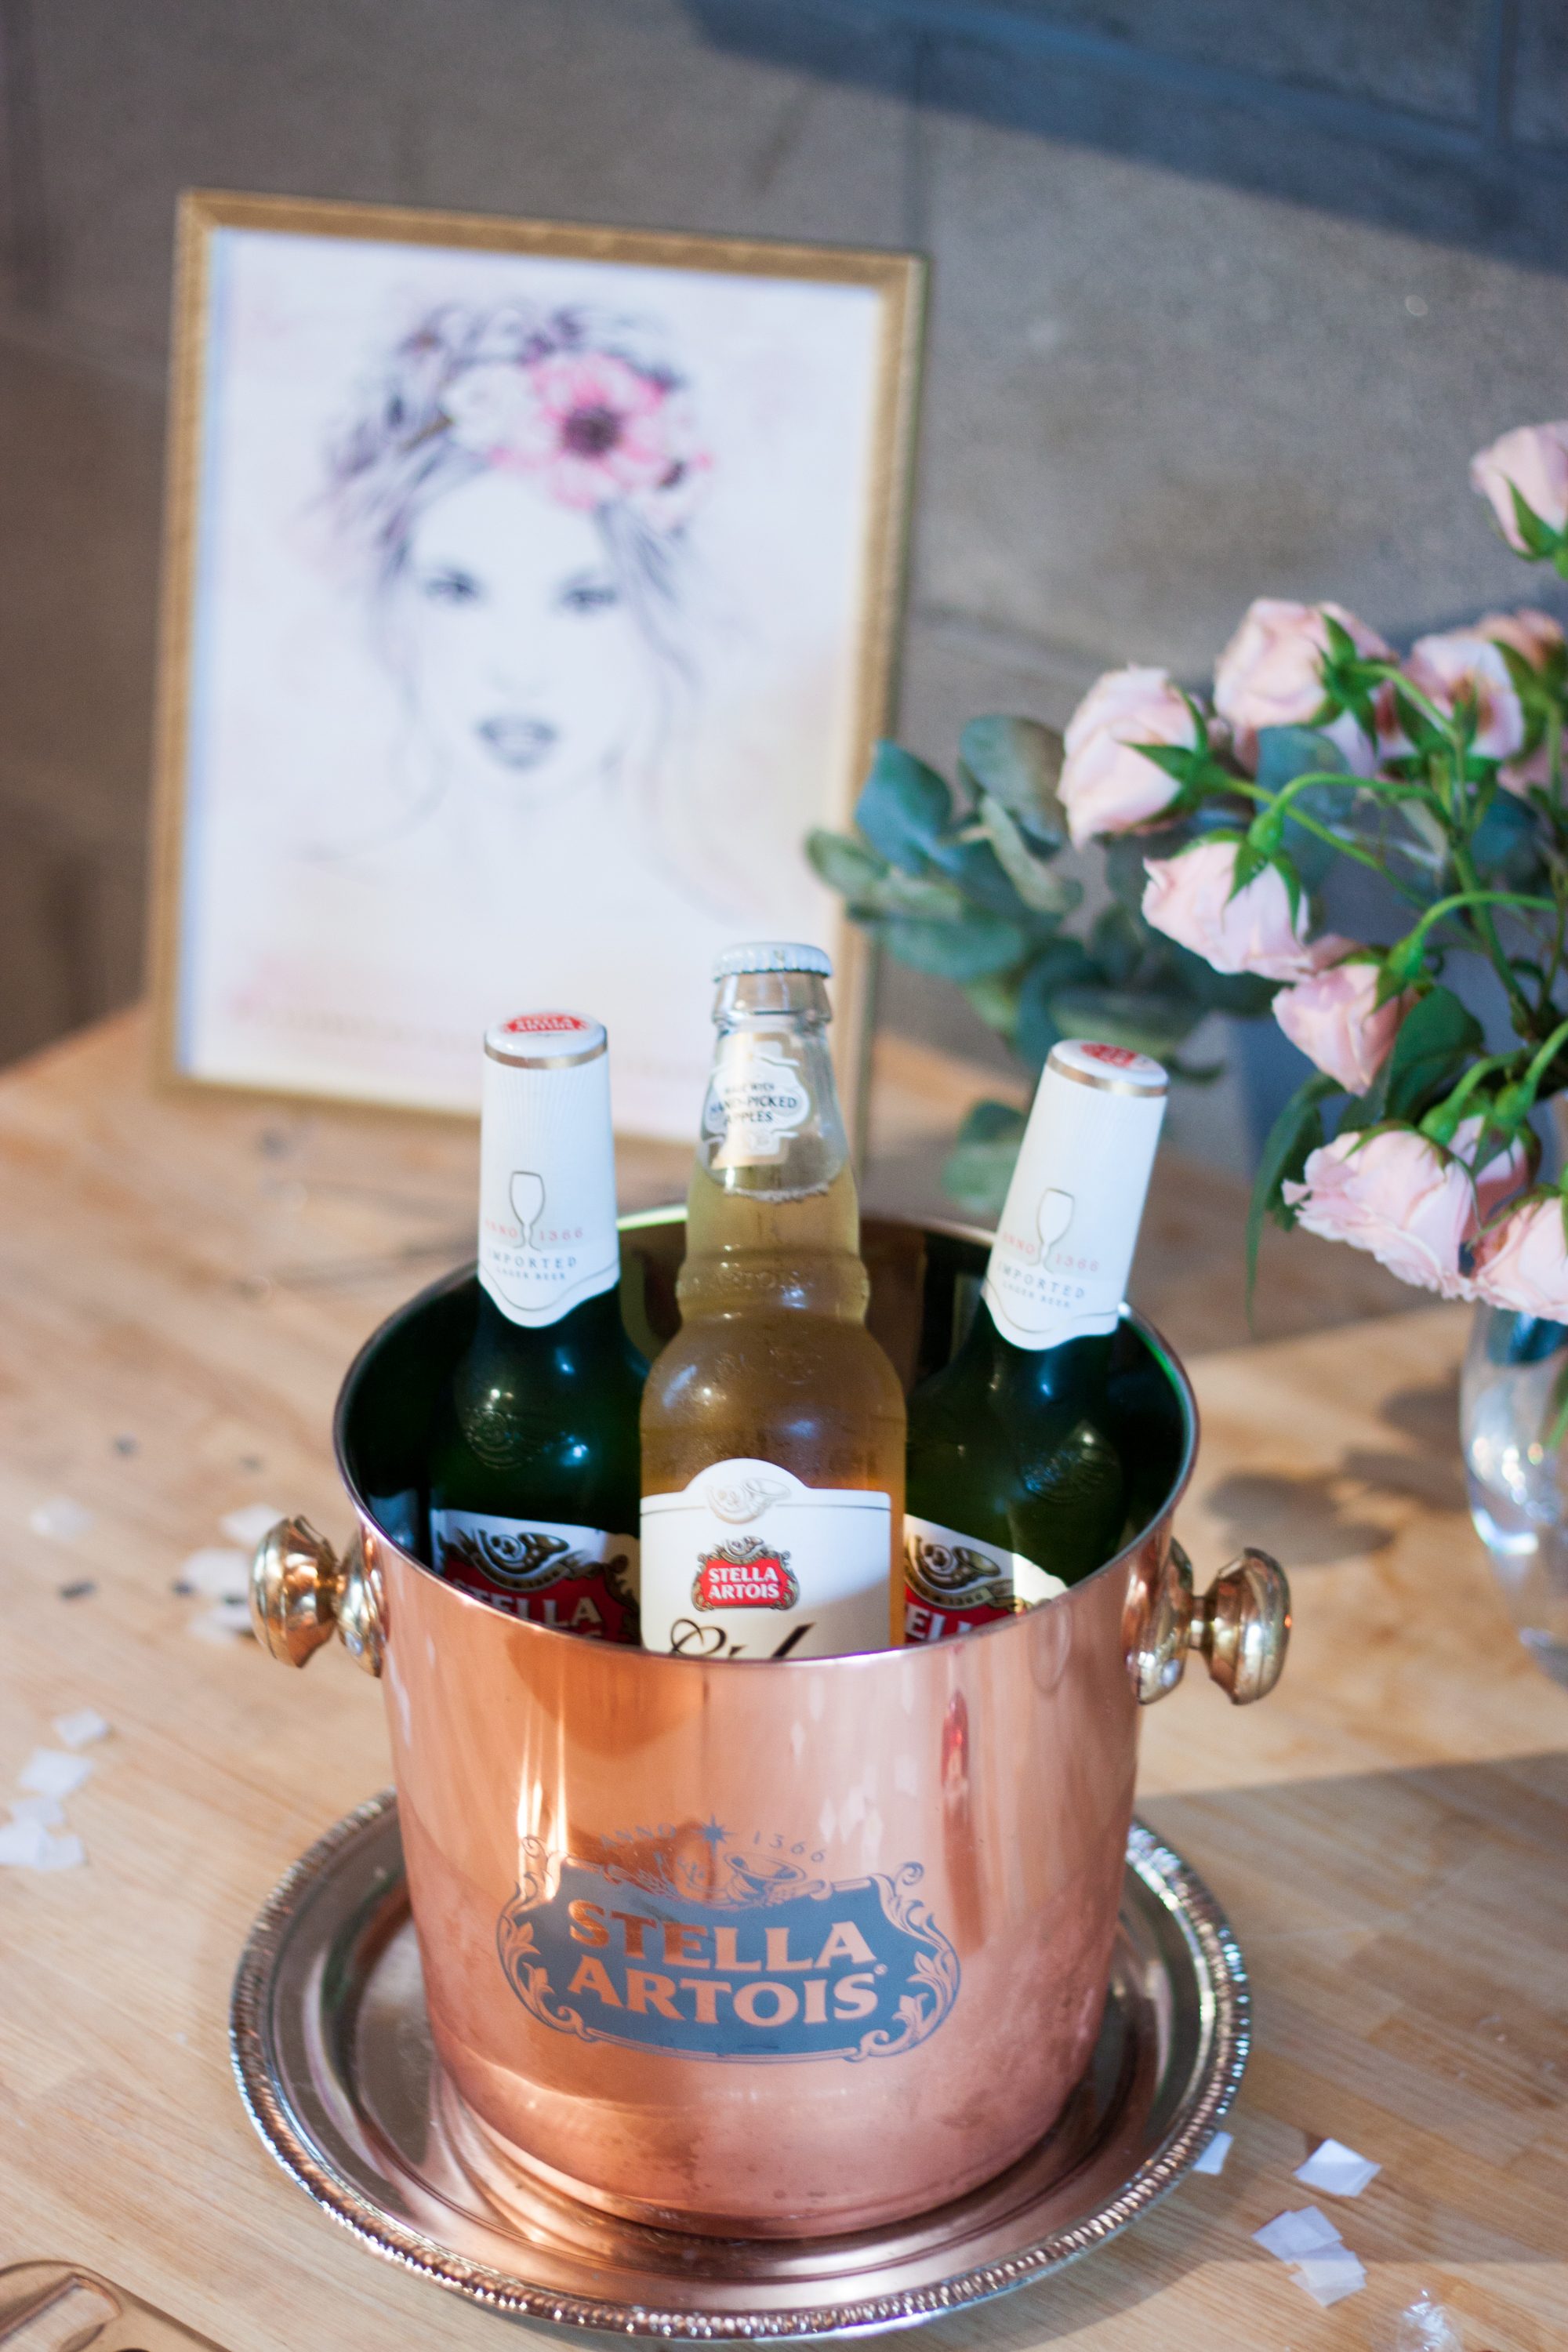 stella artois, boho glam party decor, party hosting tips, boho glam party ideas, summer party ideas, happy hour party, summer hosting, stella cidre, stella lager, laurie duncan art, how to decorate for a party, summer party ideas